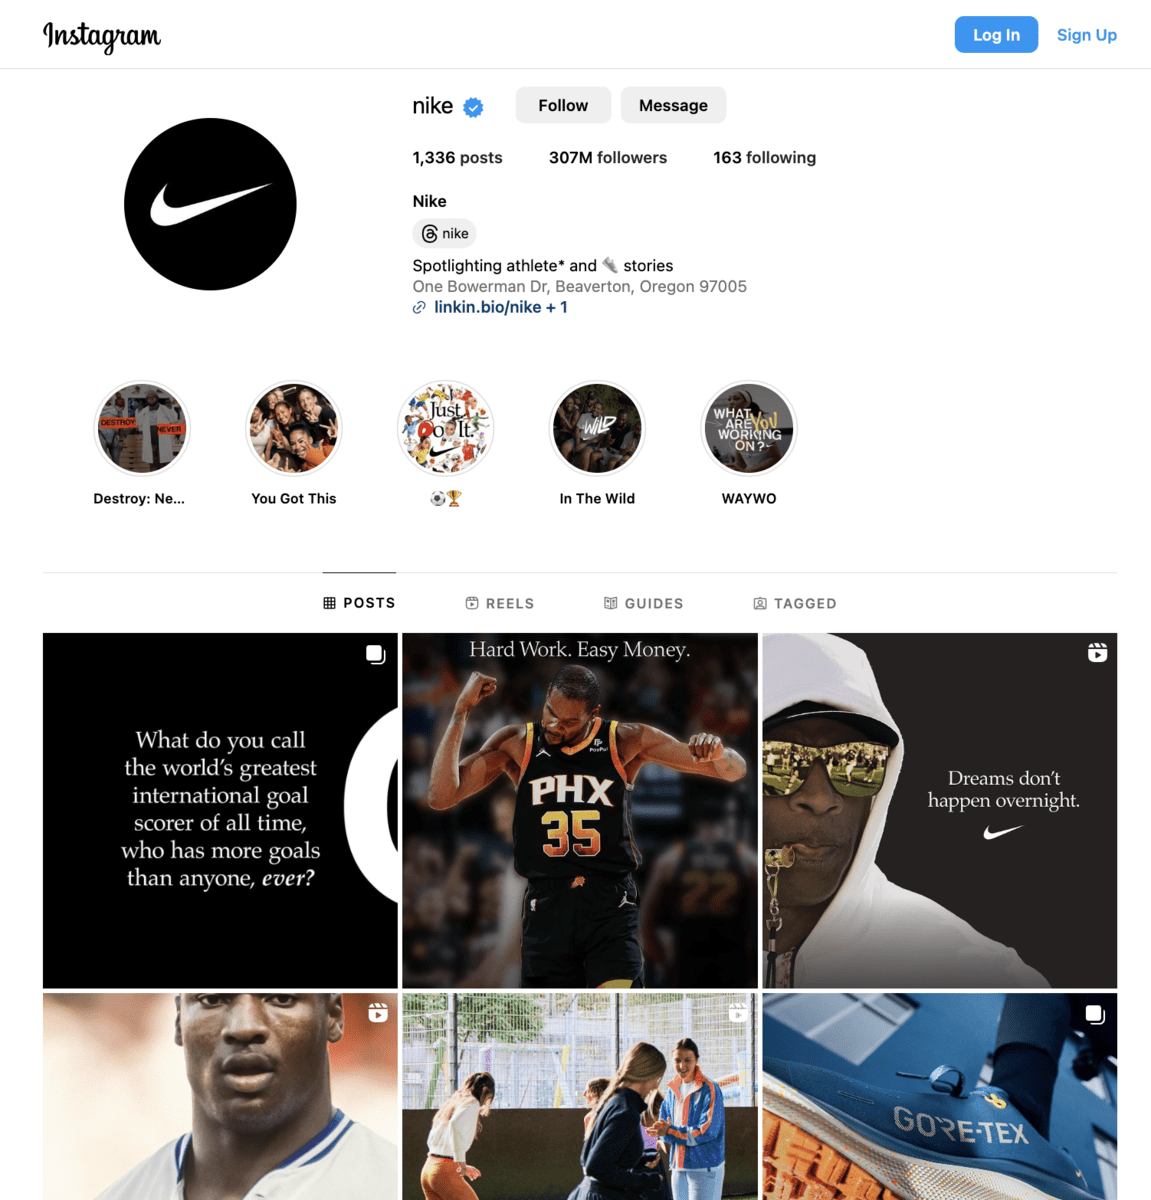 Nike-s Instagram page